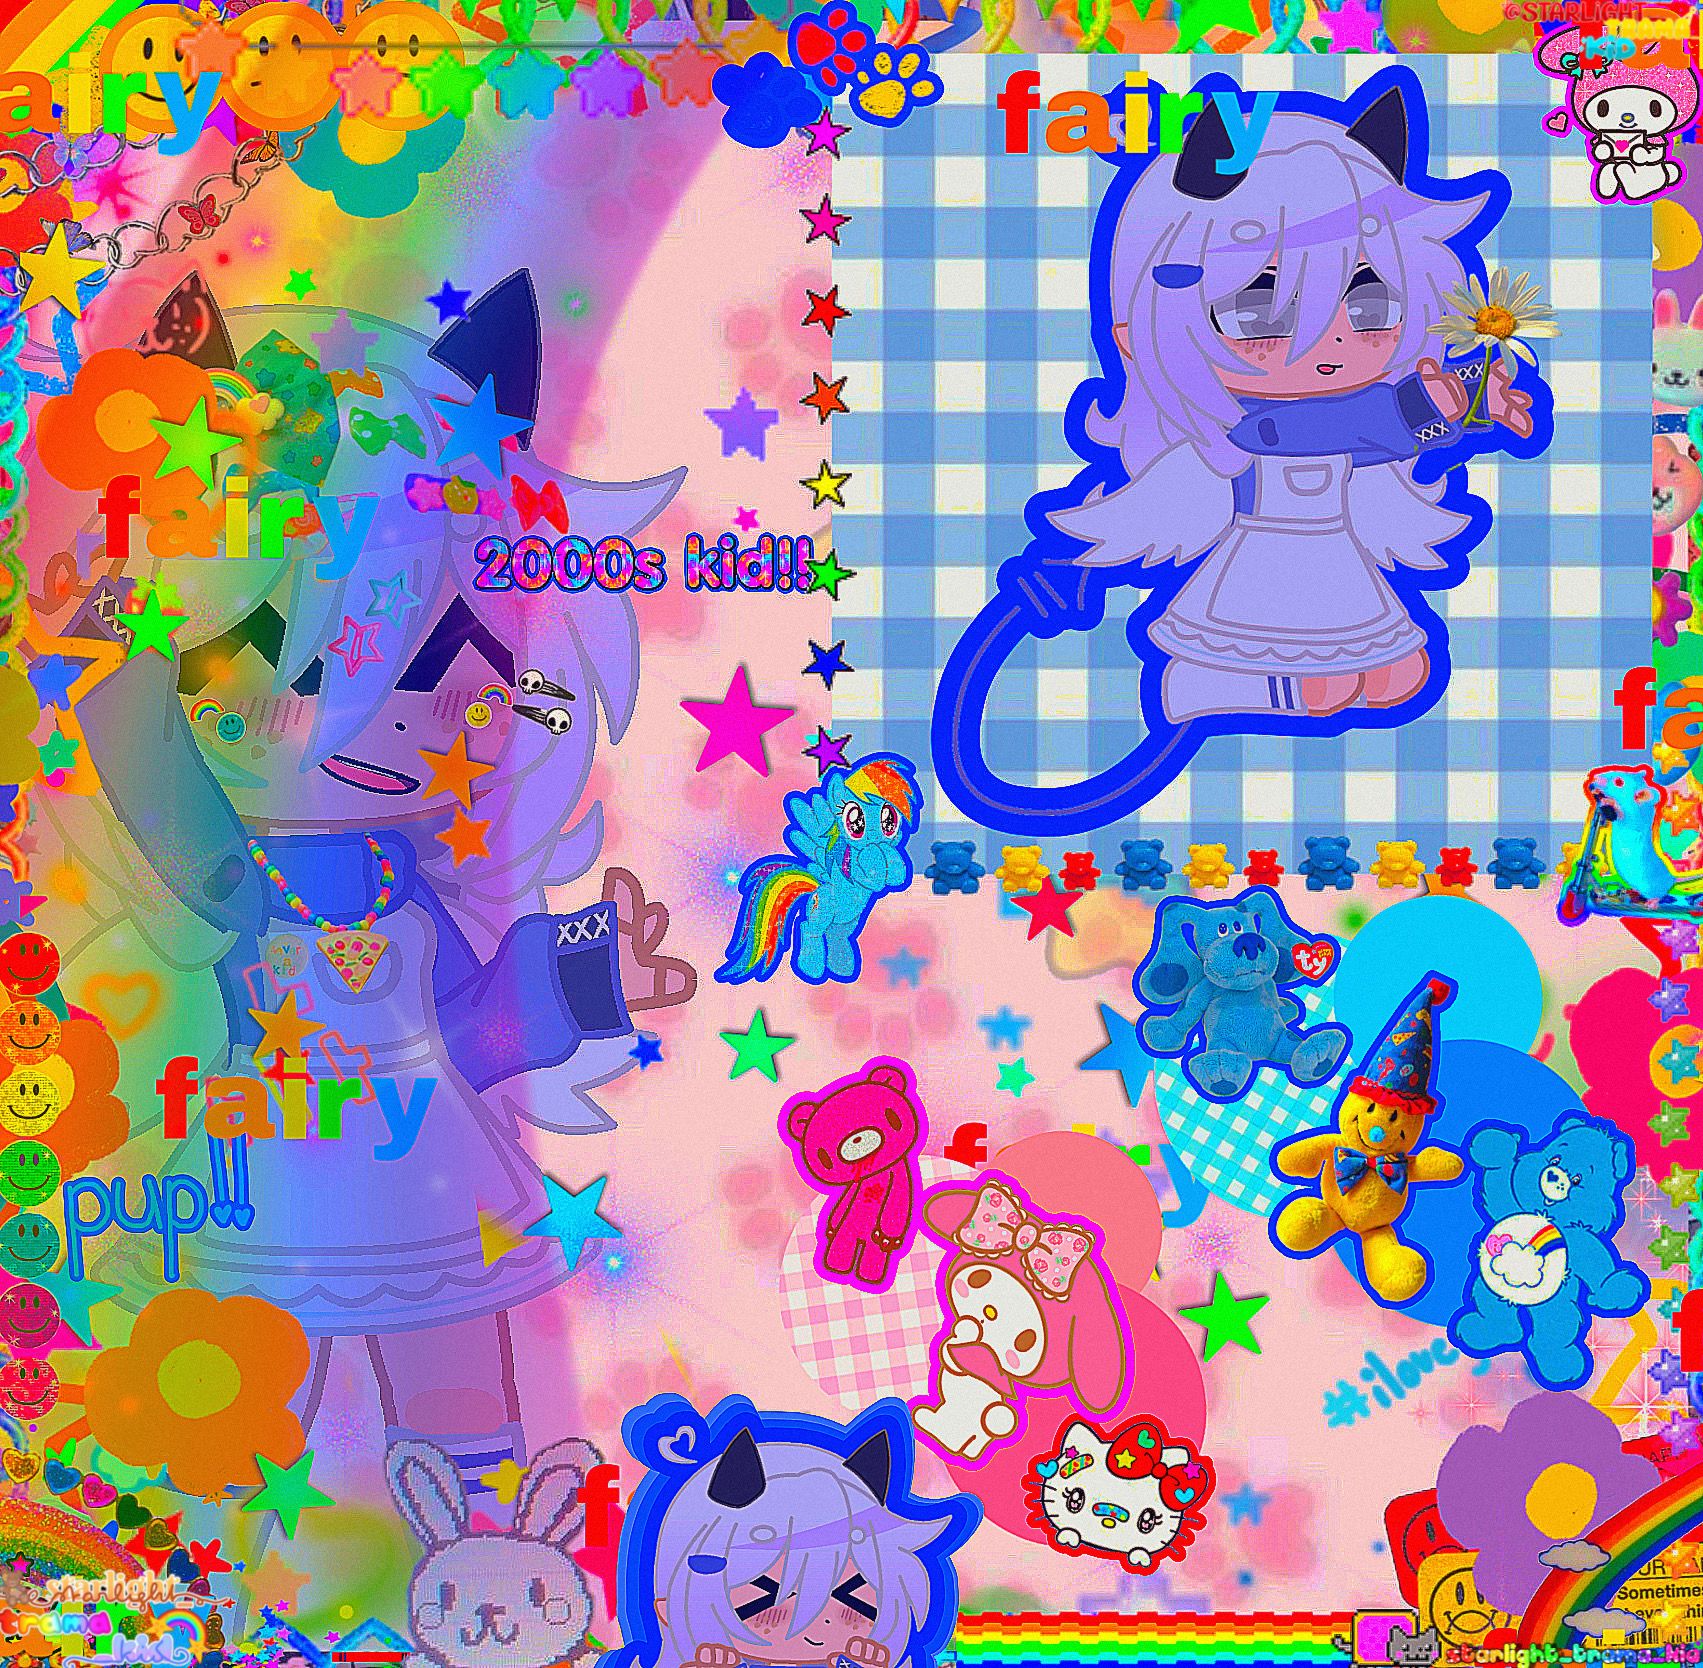 A colorful image of cartoon characters including a rainbow, a cat, a dog, and a rainbow pony. - Webcore